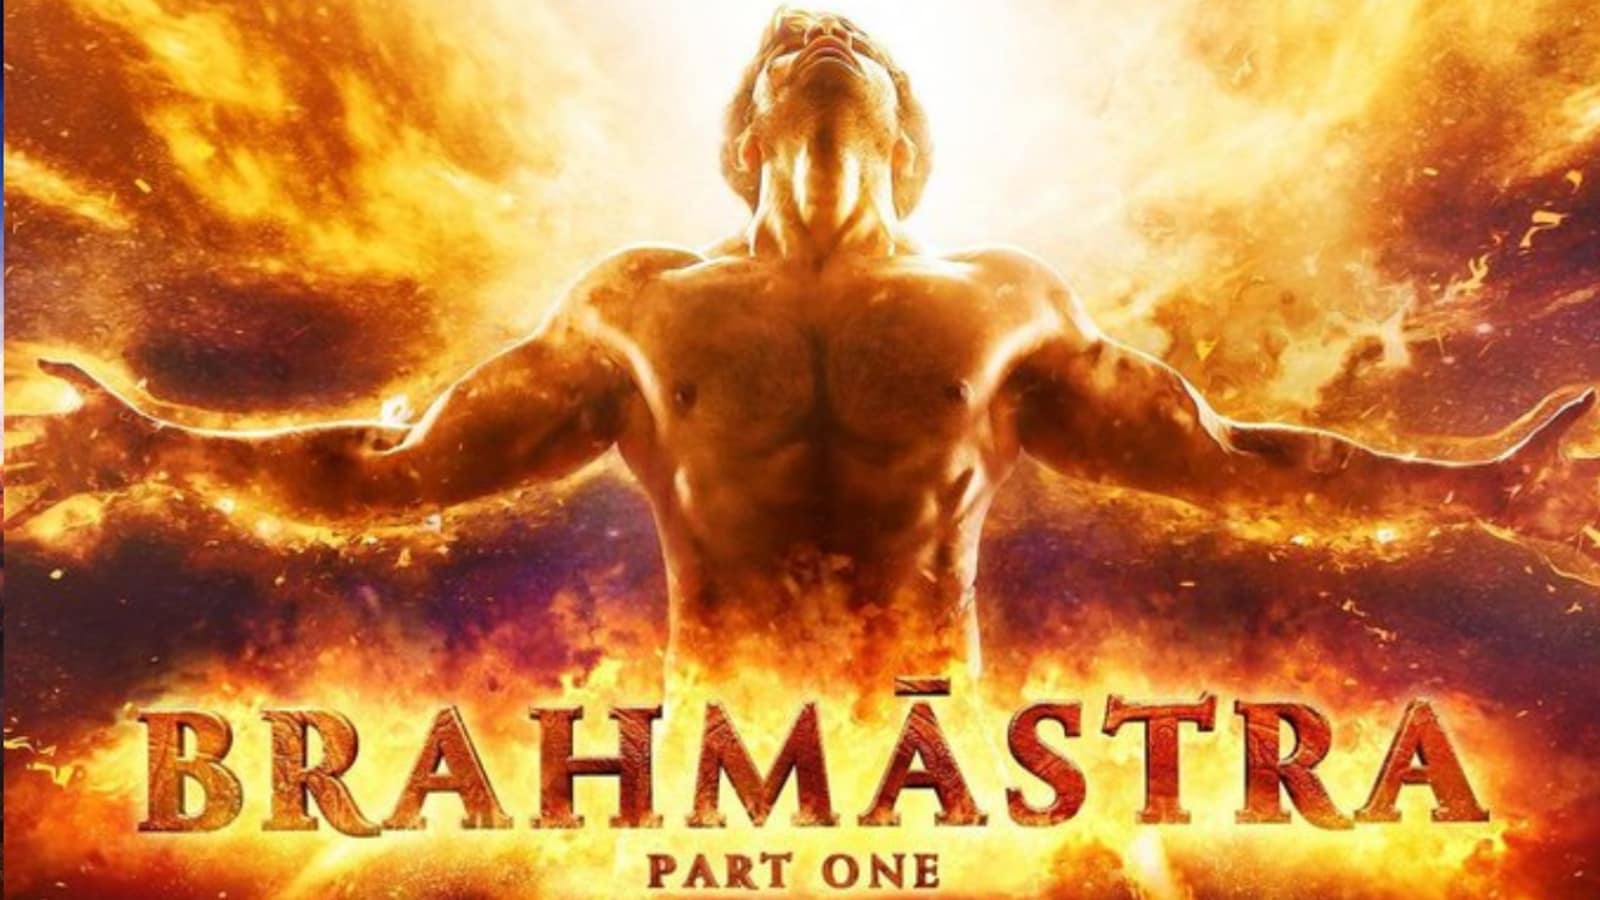 After Brahmastra, Prime Focus expects uptick in India visual effects  business, bets on new film Ramayana